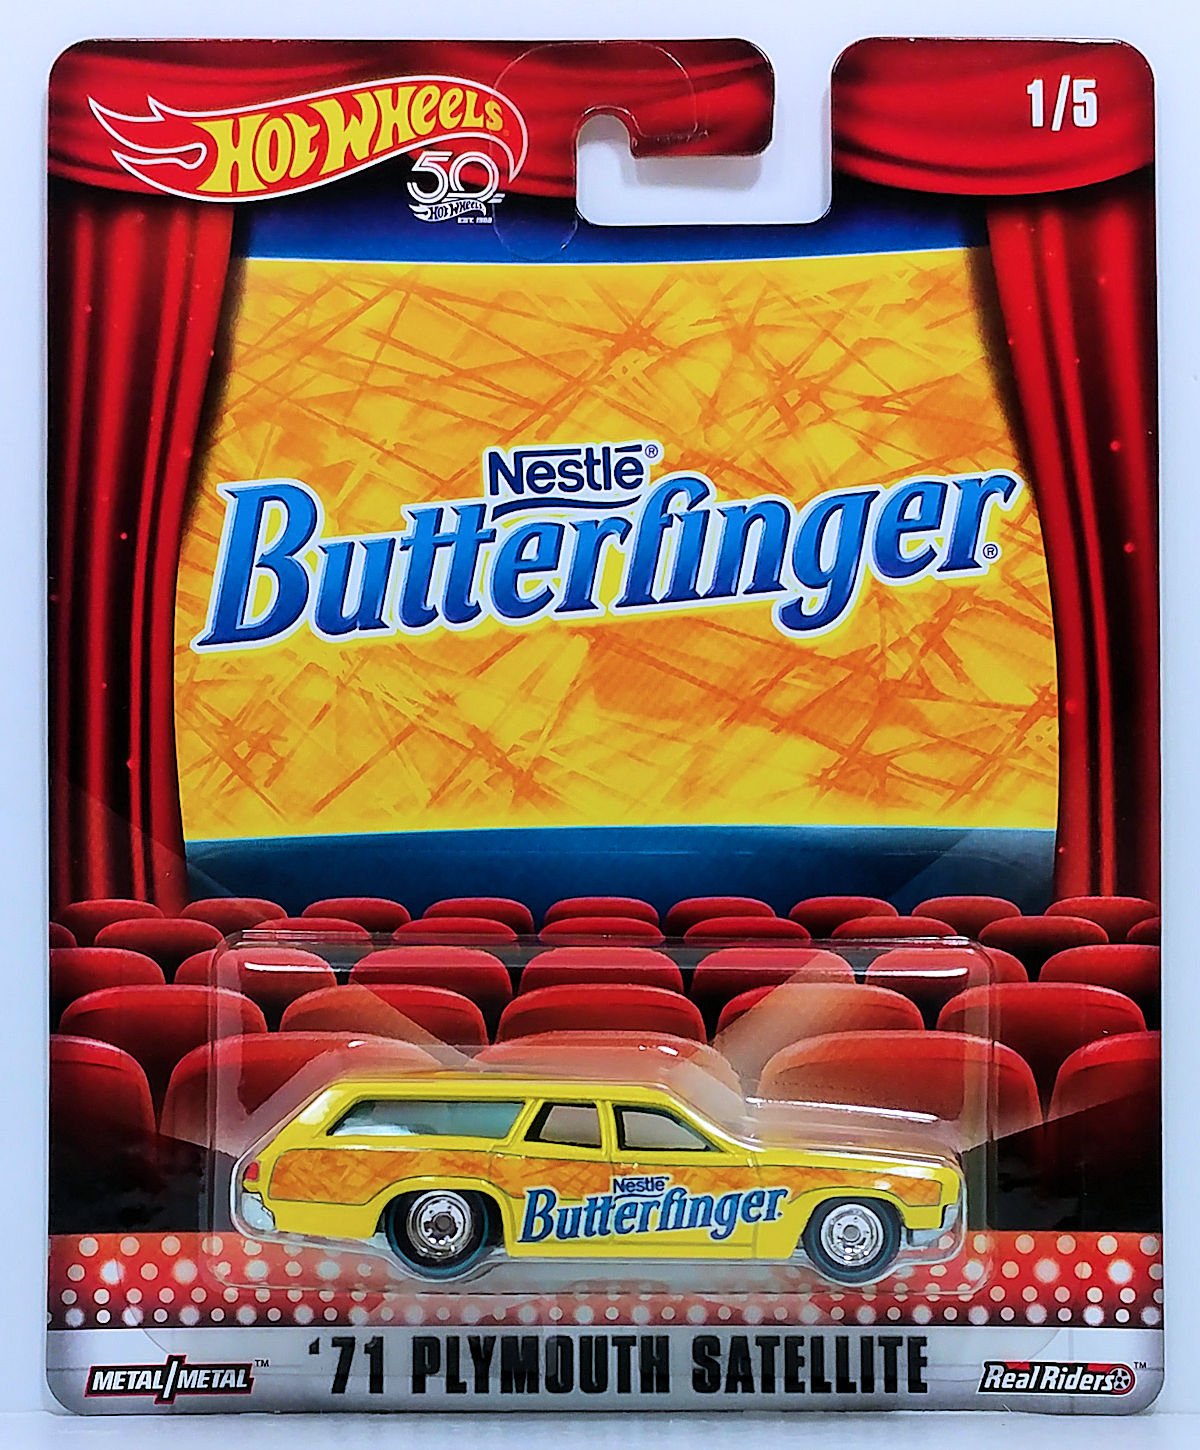 Hot Wheels 2018 - Pop Culture / Nestle 1/5 - '71 Plymouth Satellite - Yellow / Butterfinger - Metal/Metal & Real Riders